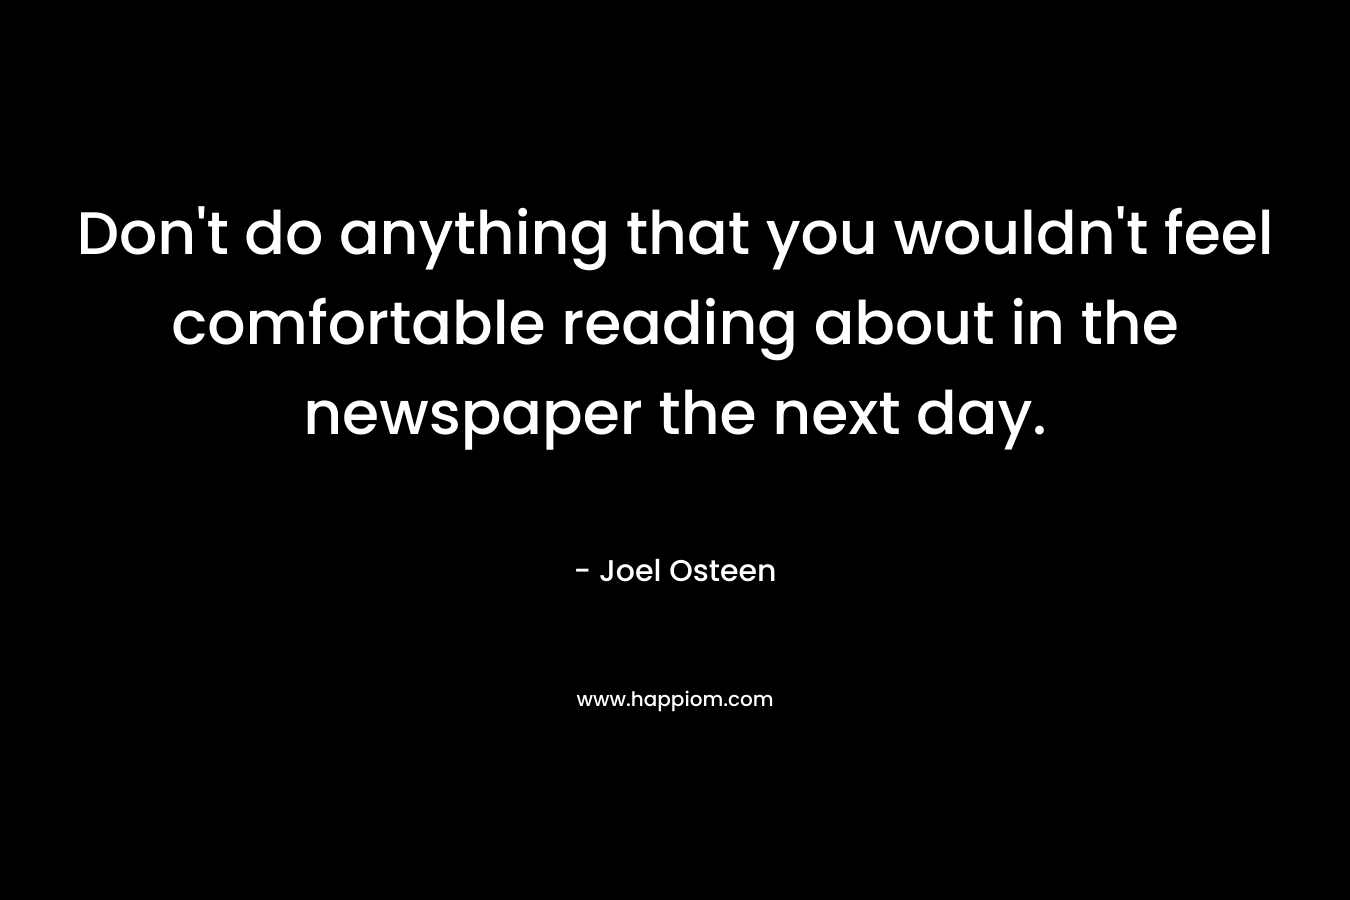 Don’t do anything that you wouldn’t feel comfortable reading about in the newspaper the next day. – Joel Osteen